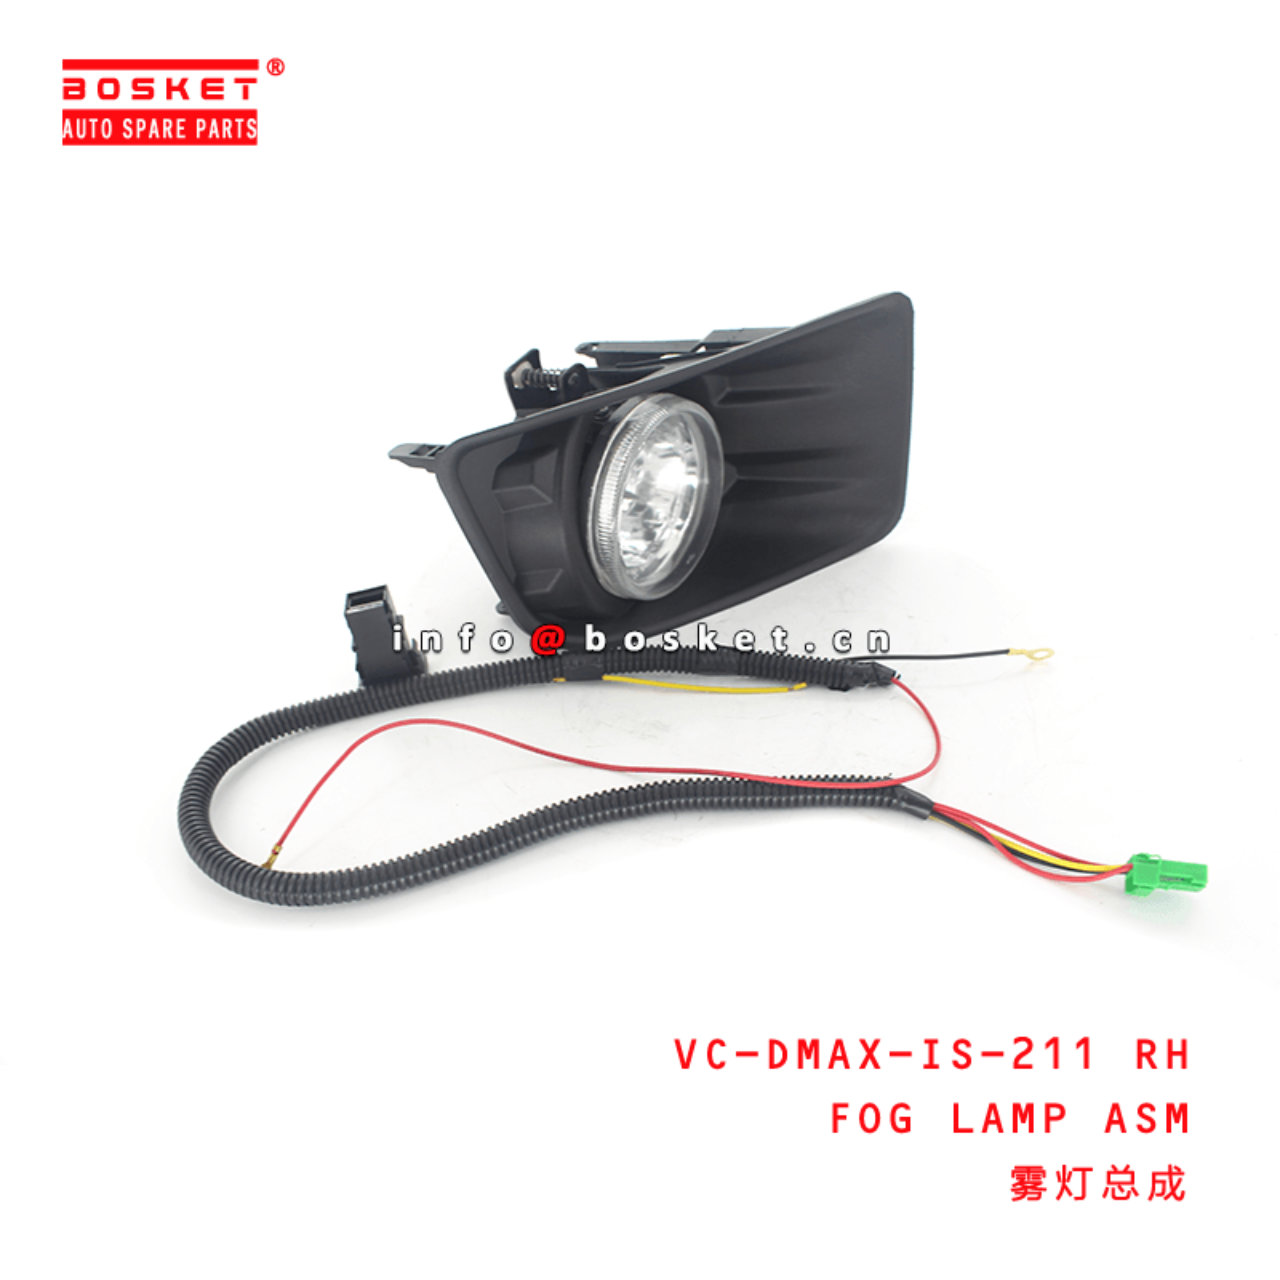 VC-DMAX-IS-211 RH Fog Lamp Assembly Suitable for ISUZU D-MAX 2013-2015